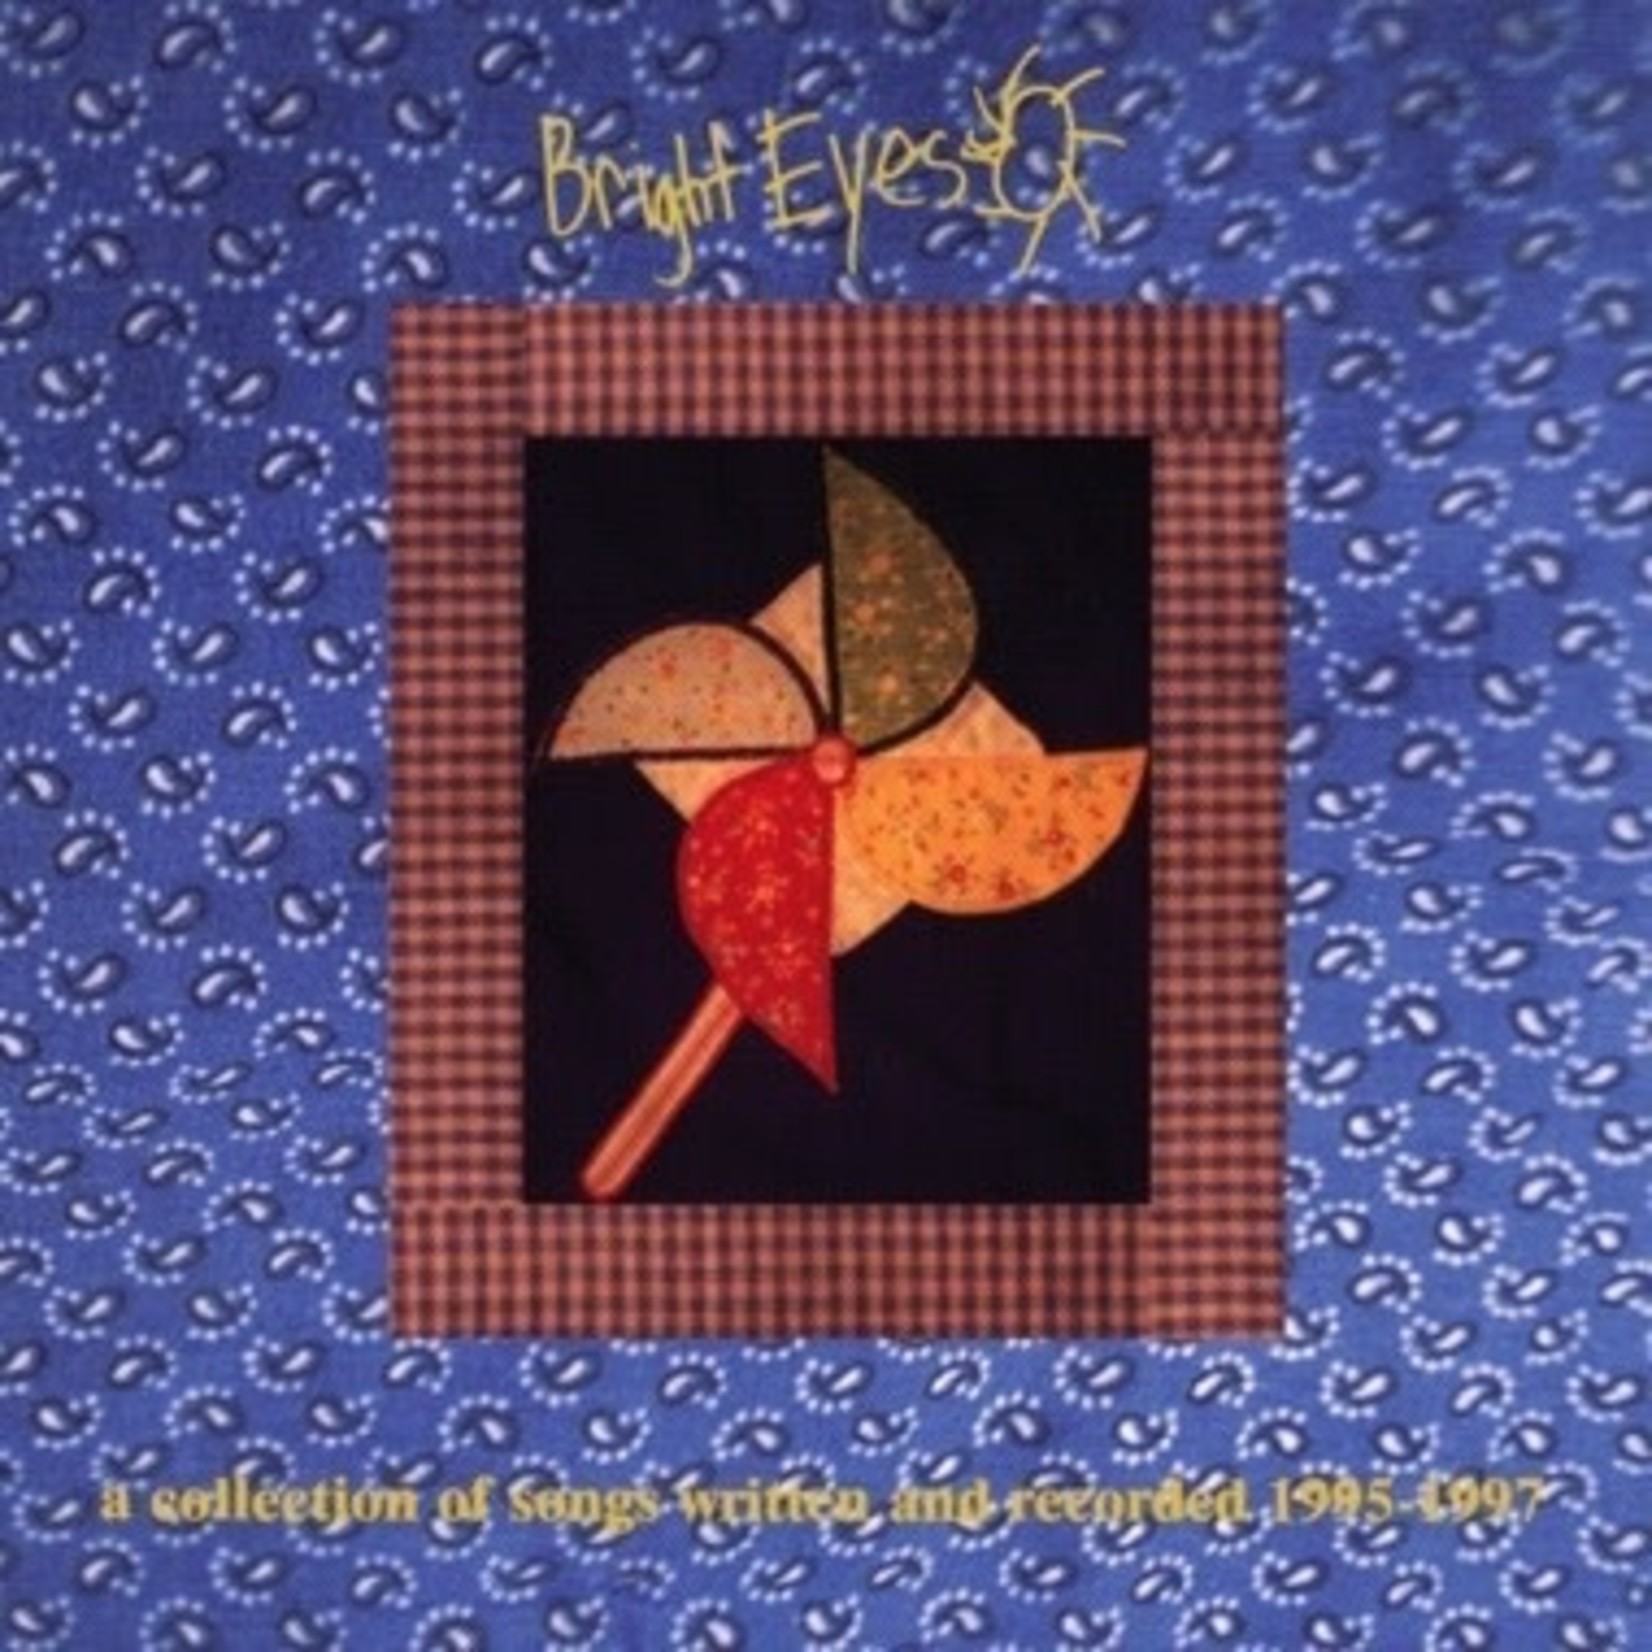 Dead Oceans Bright Eyes - A Collection Of Songs Written And Recorded 1995-1997 (2LP)